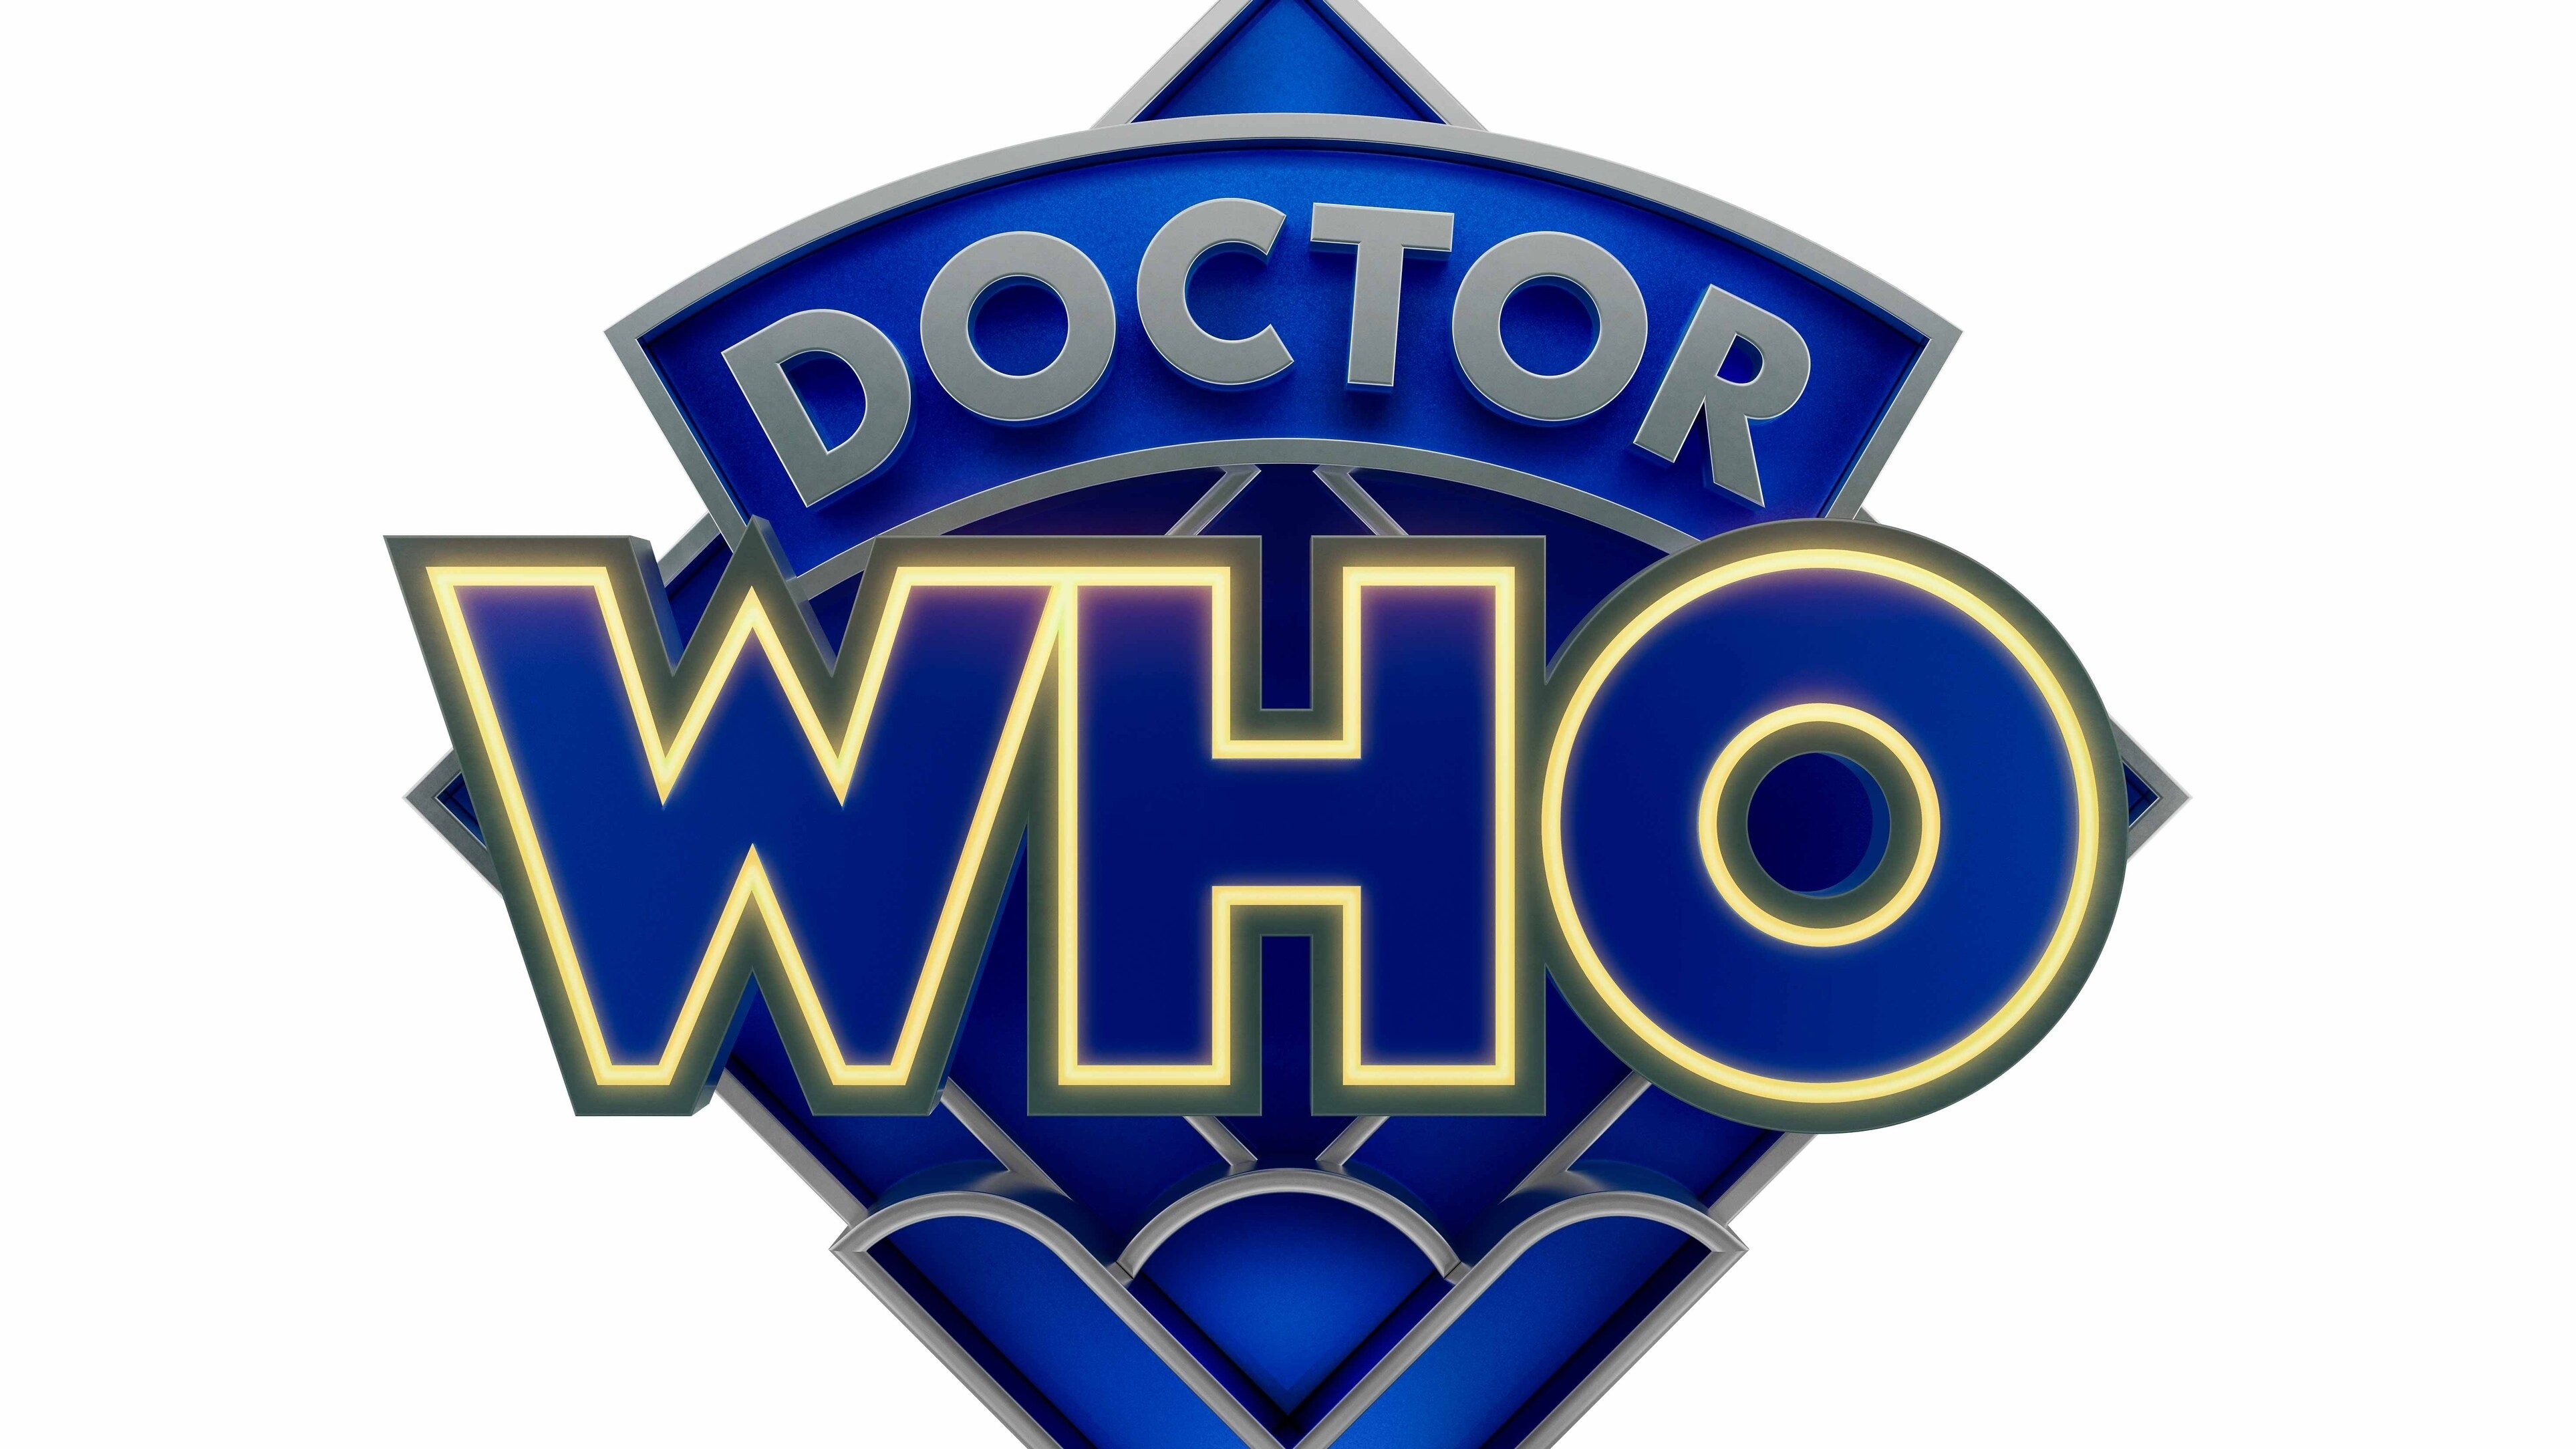 New Who, New Home! Disney+ Reveals Trailer For New 'Doctor Who